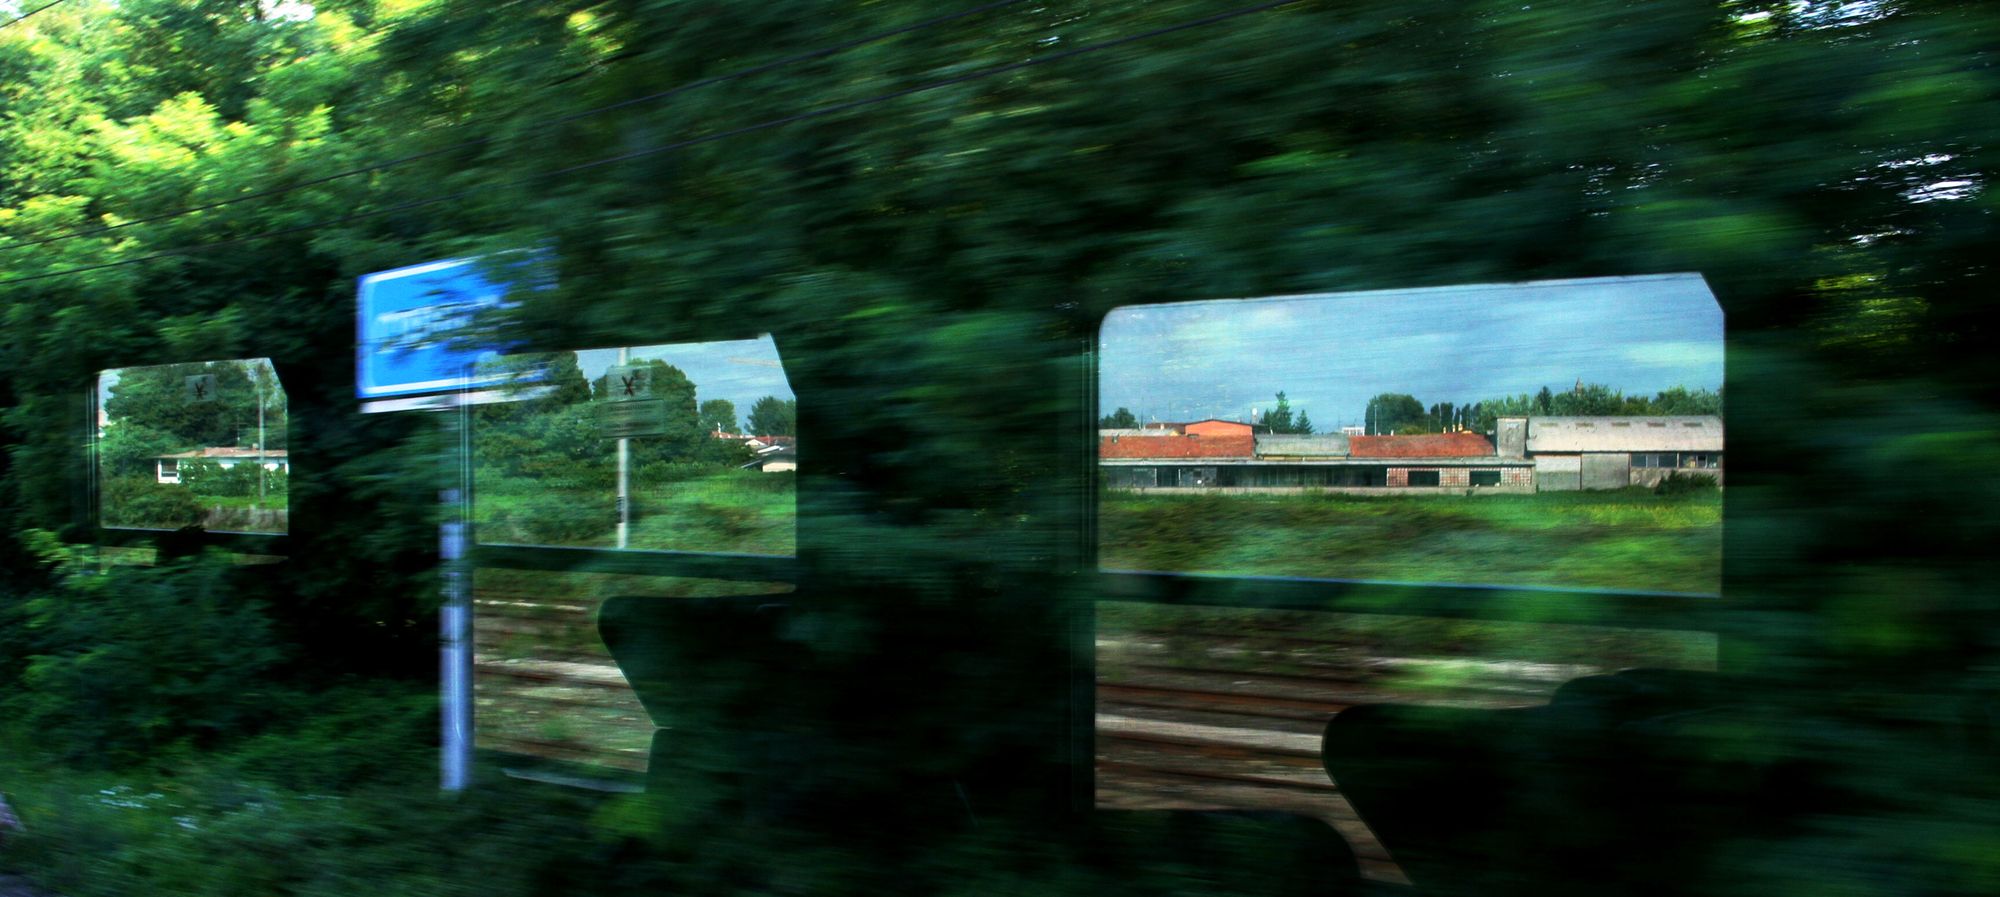 Through the windows of a passing train di Norasmind